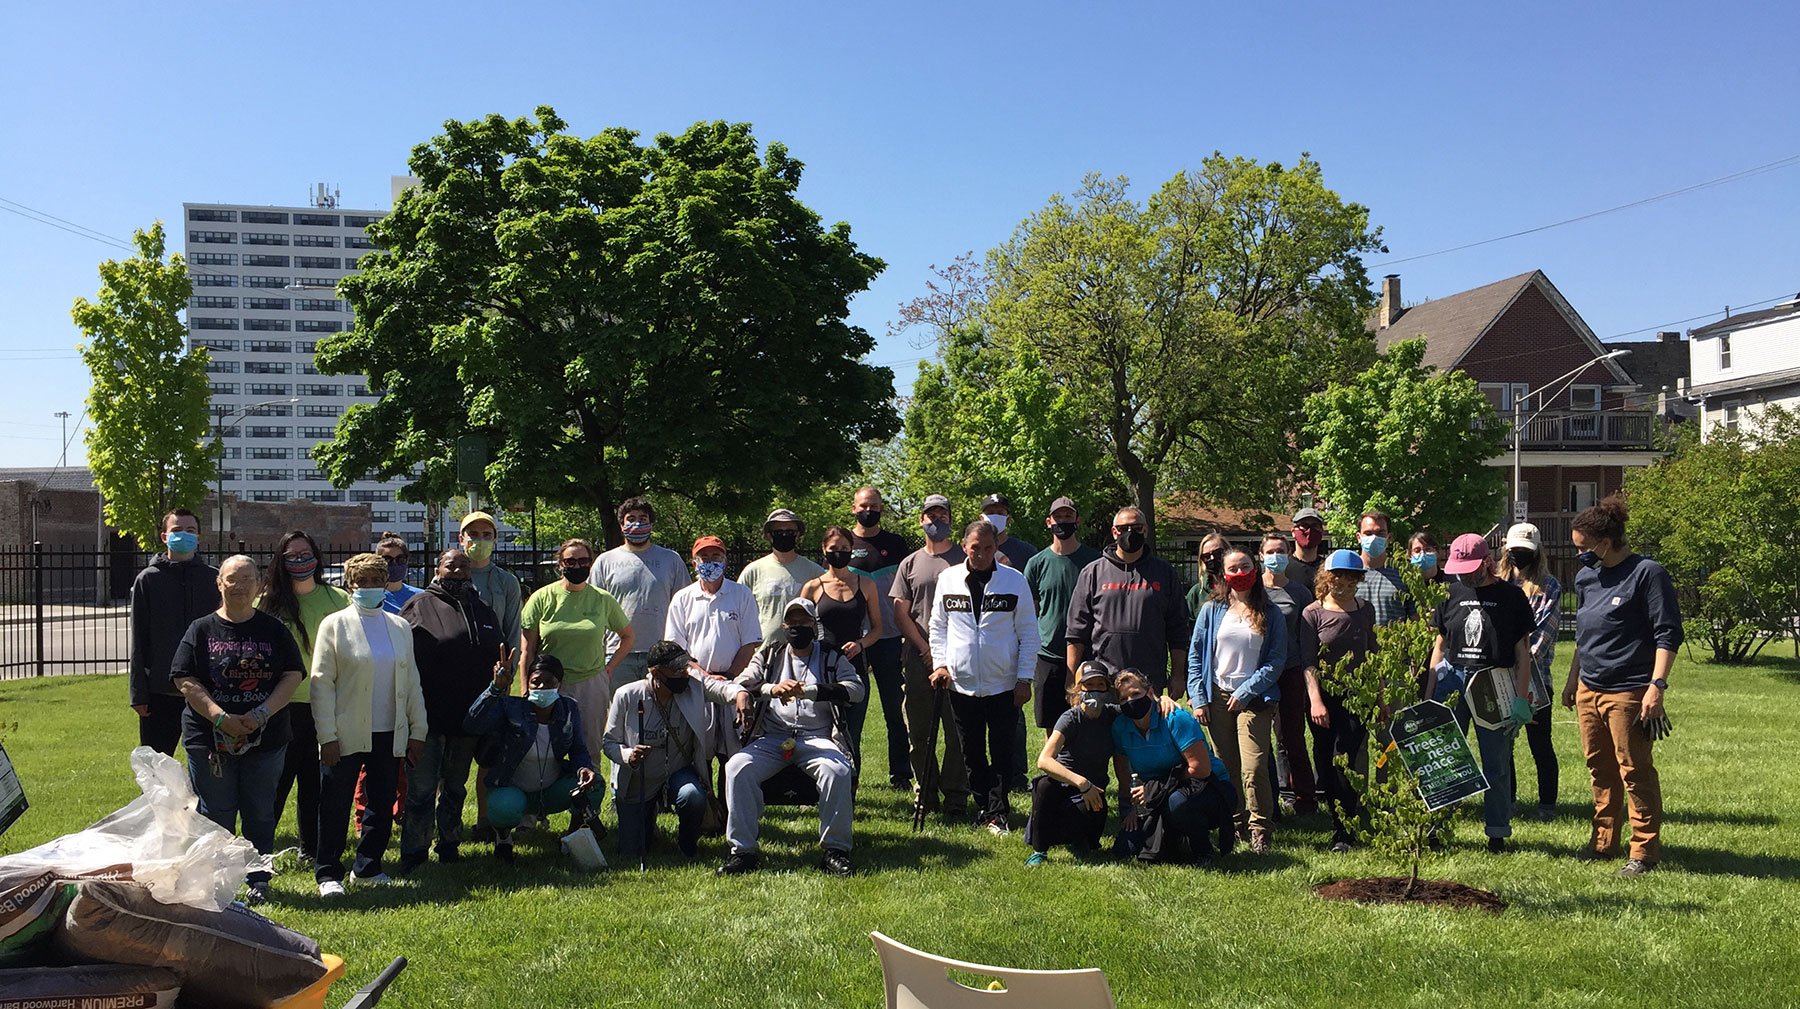  In Englewood, WestRock, in partnership with the Arbor Day Foundation, and Oak Street Health, funded a tree-planting and seedling distribution program at Lafayette Terrace, an affordable housing site located just 160 feet from a major expressway. 